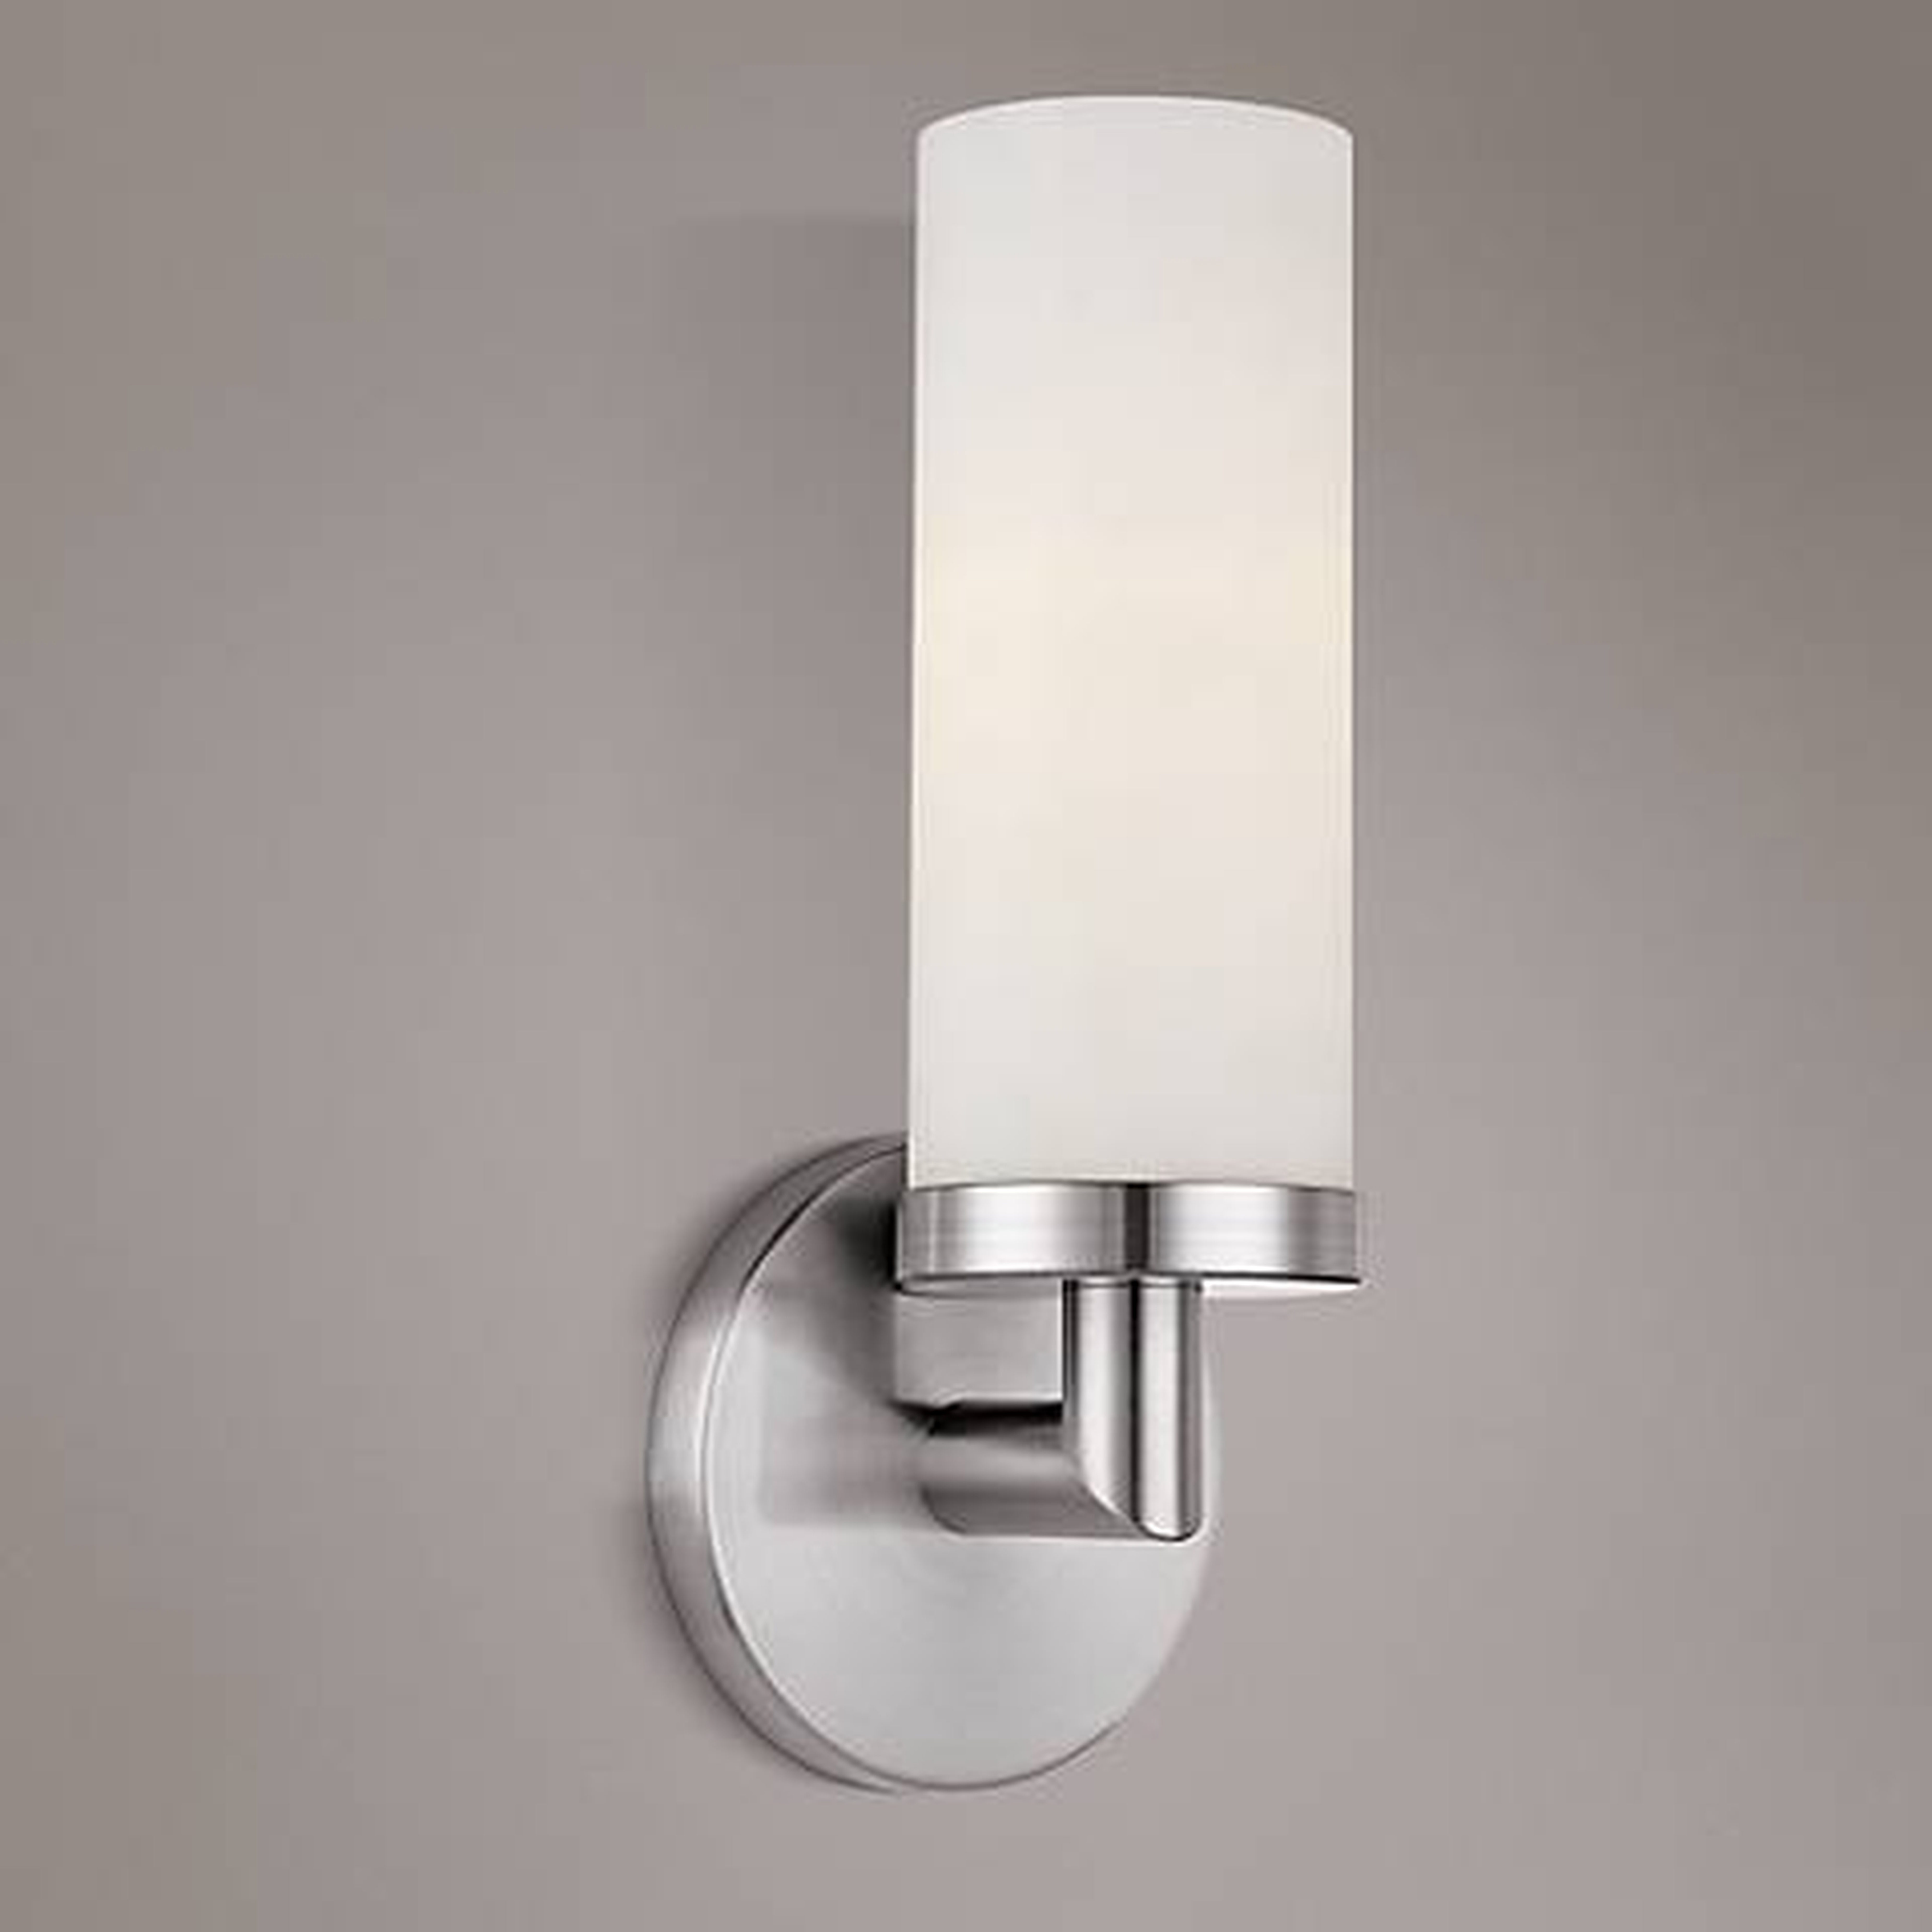 Aqueous 12" High Brushed Steel Wall Sconce - Lamps Plus